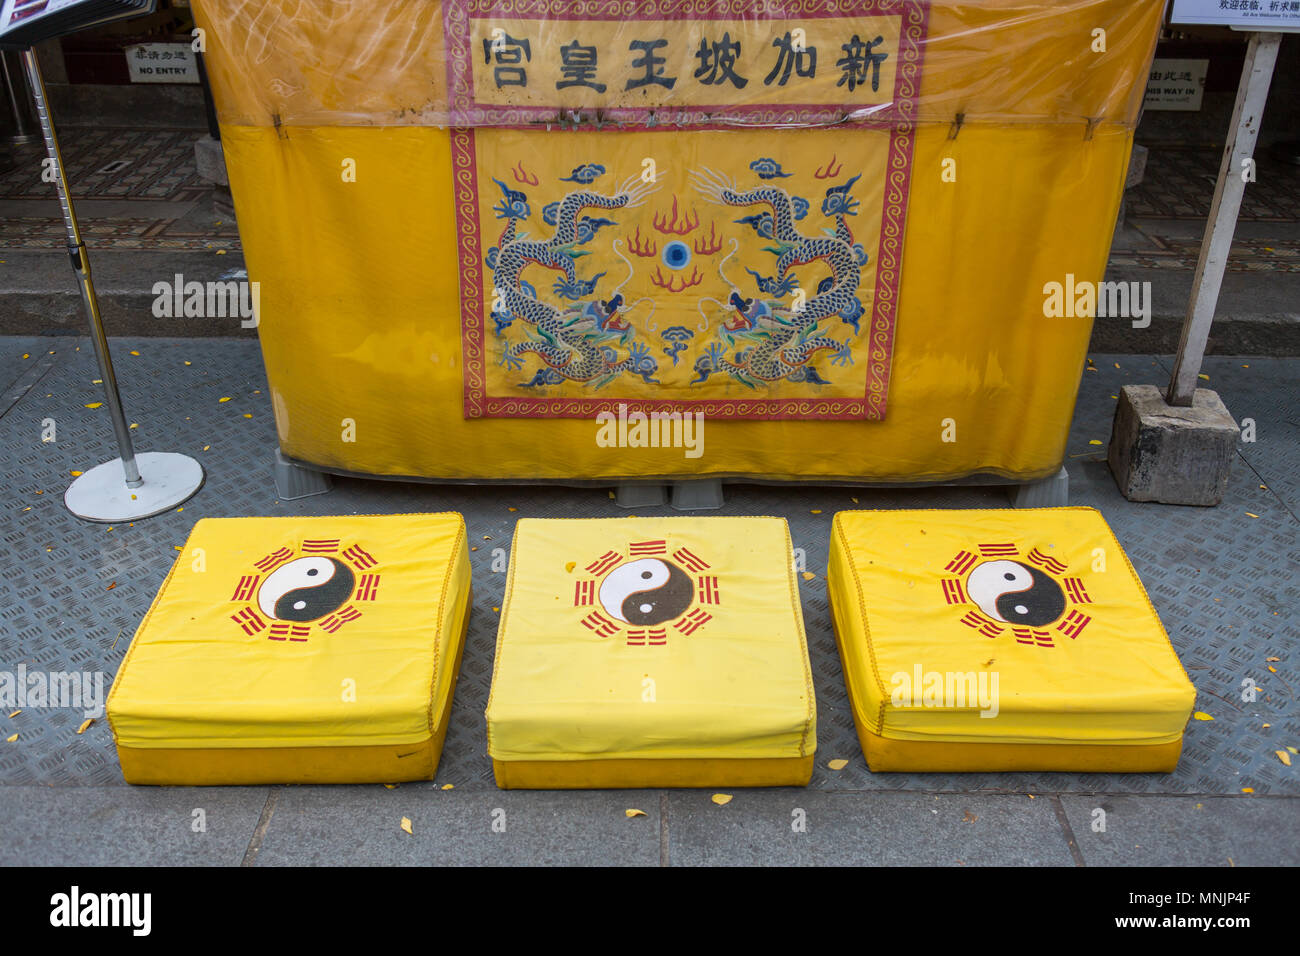 Three sets of yellow kneeling pad for praying purpose outside a Taoist temple. Singapore. Stock Photo